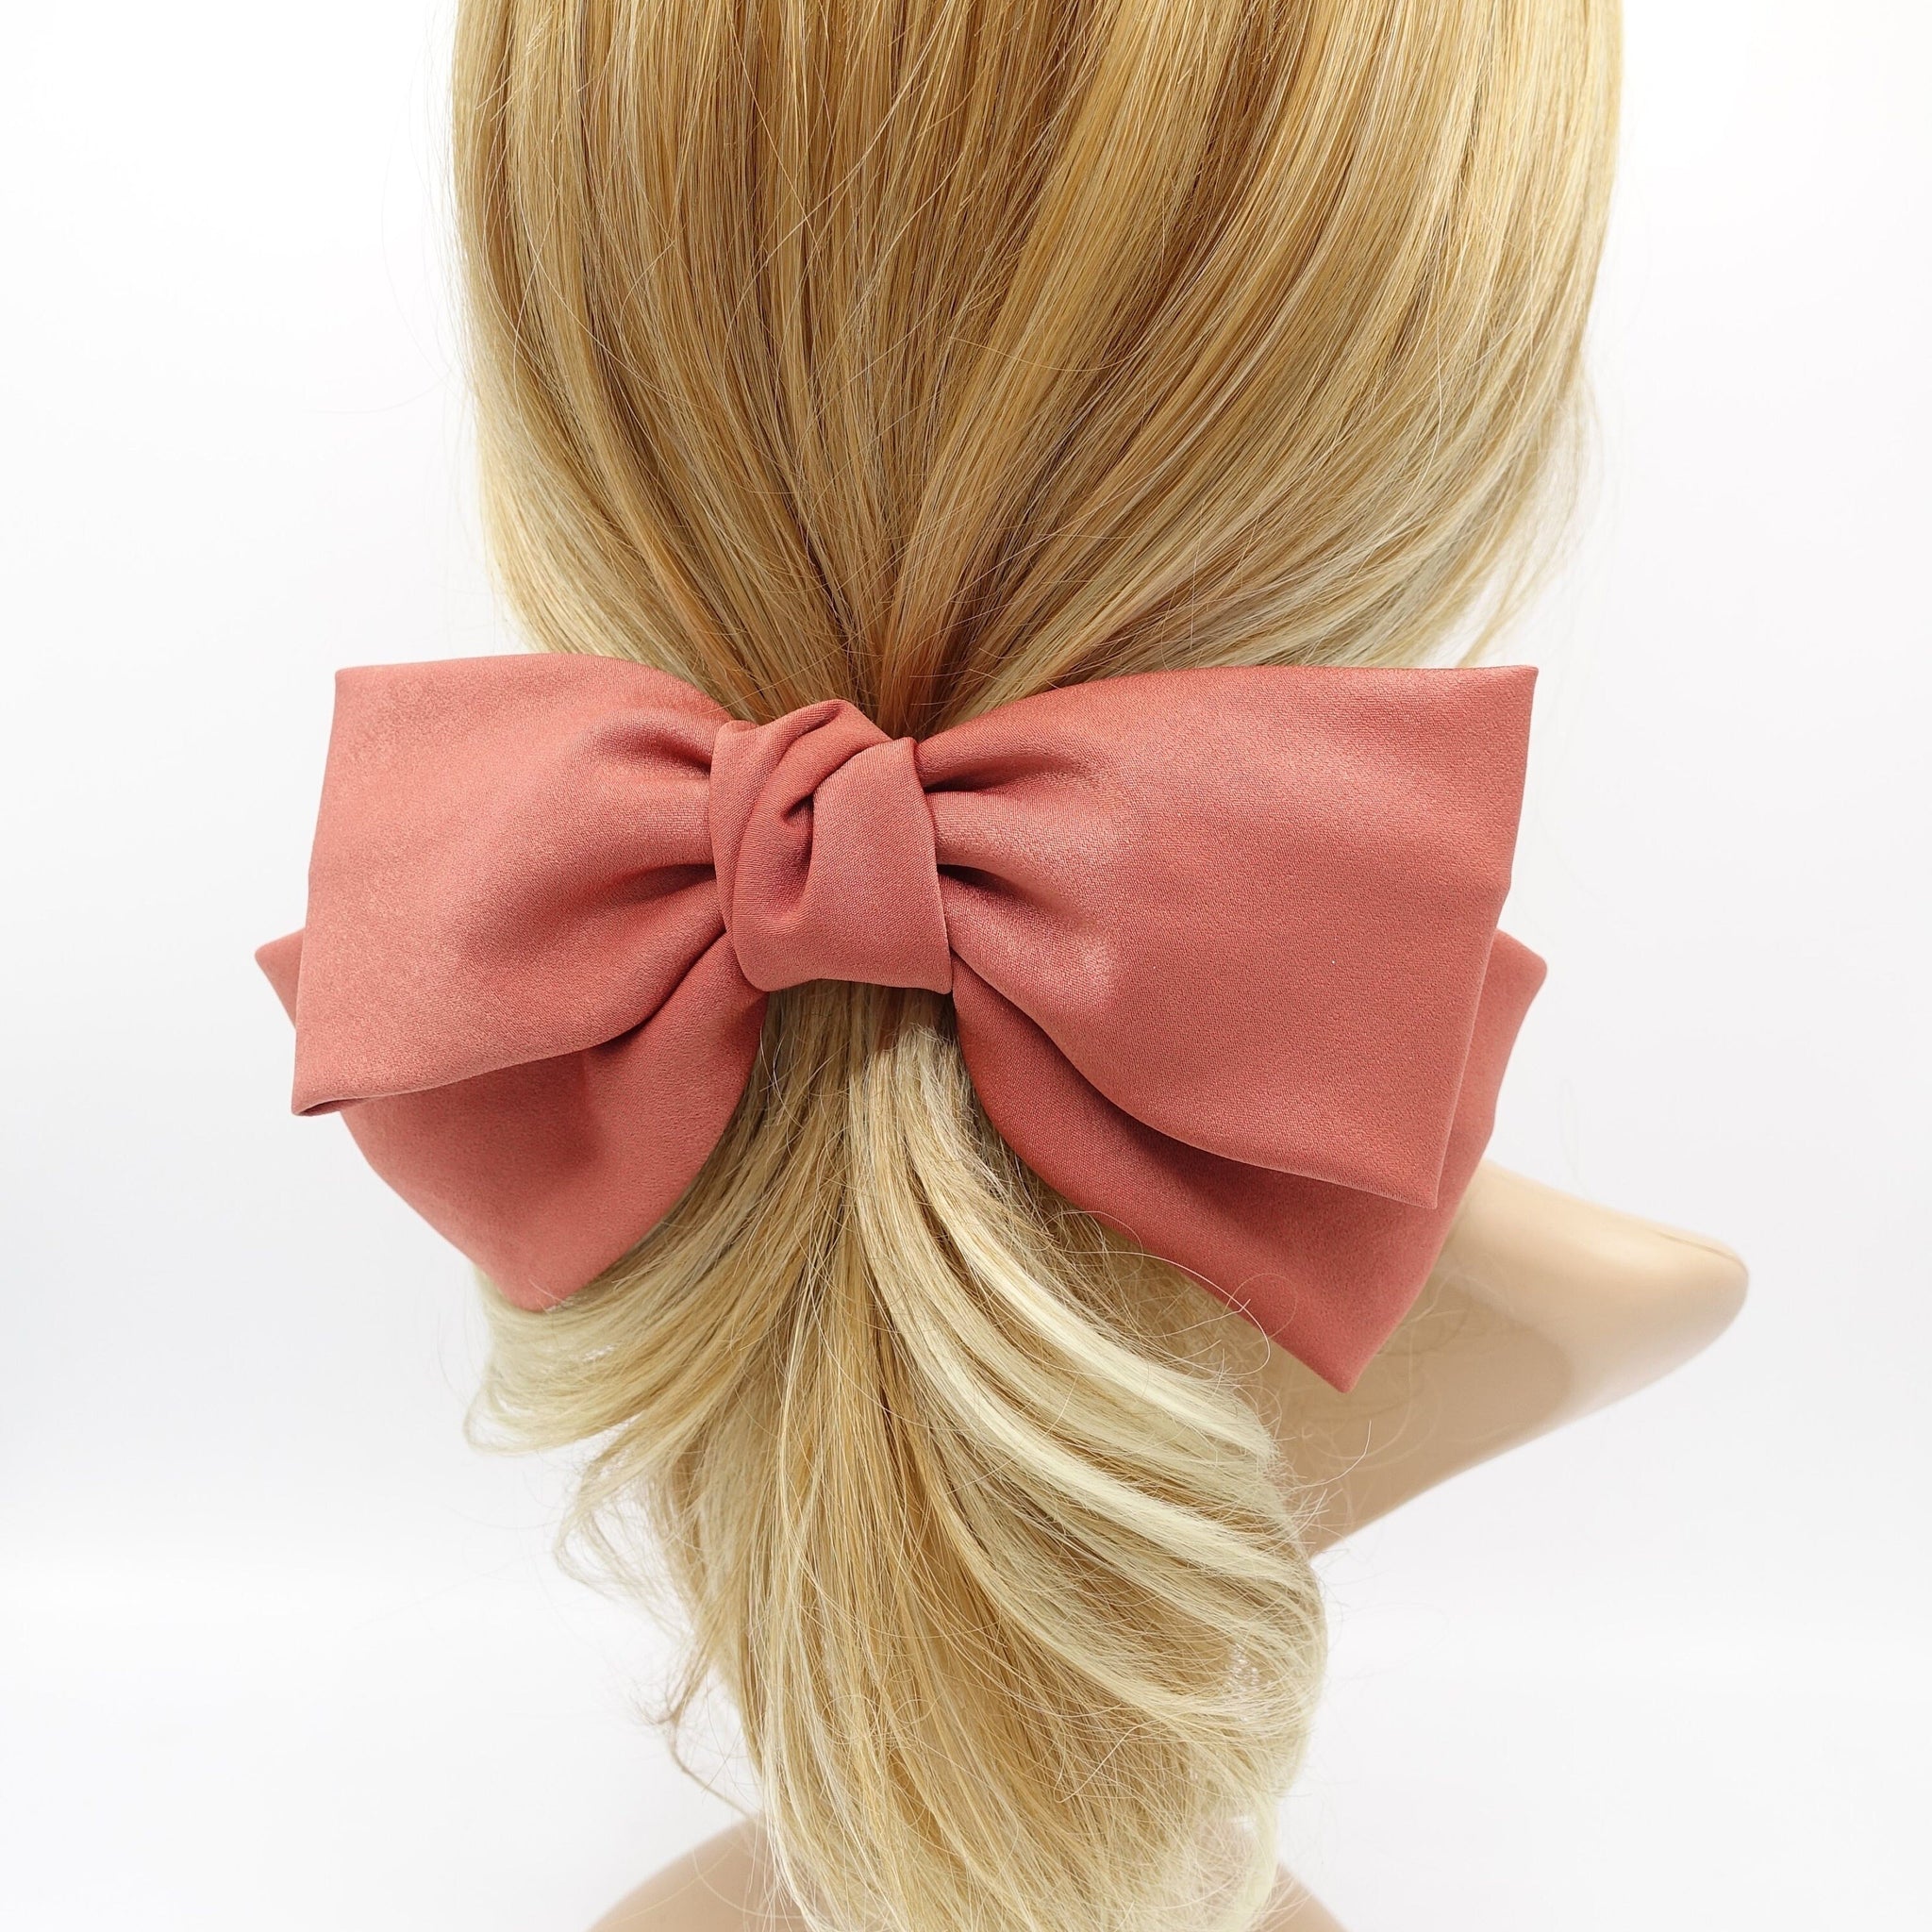 VeryShine Texas hair bow in thicker version stylish hair accessory for women